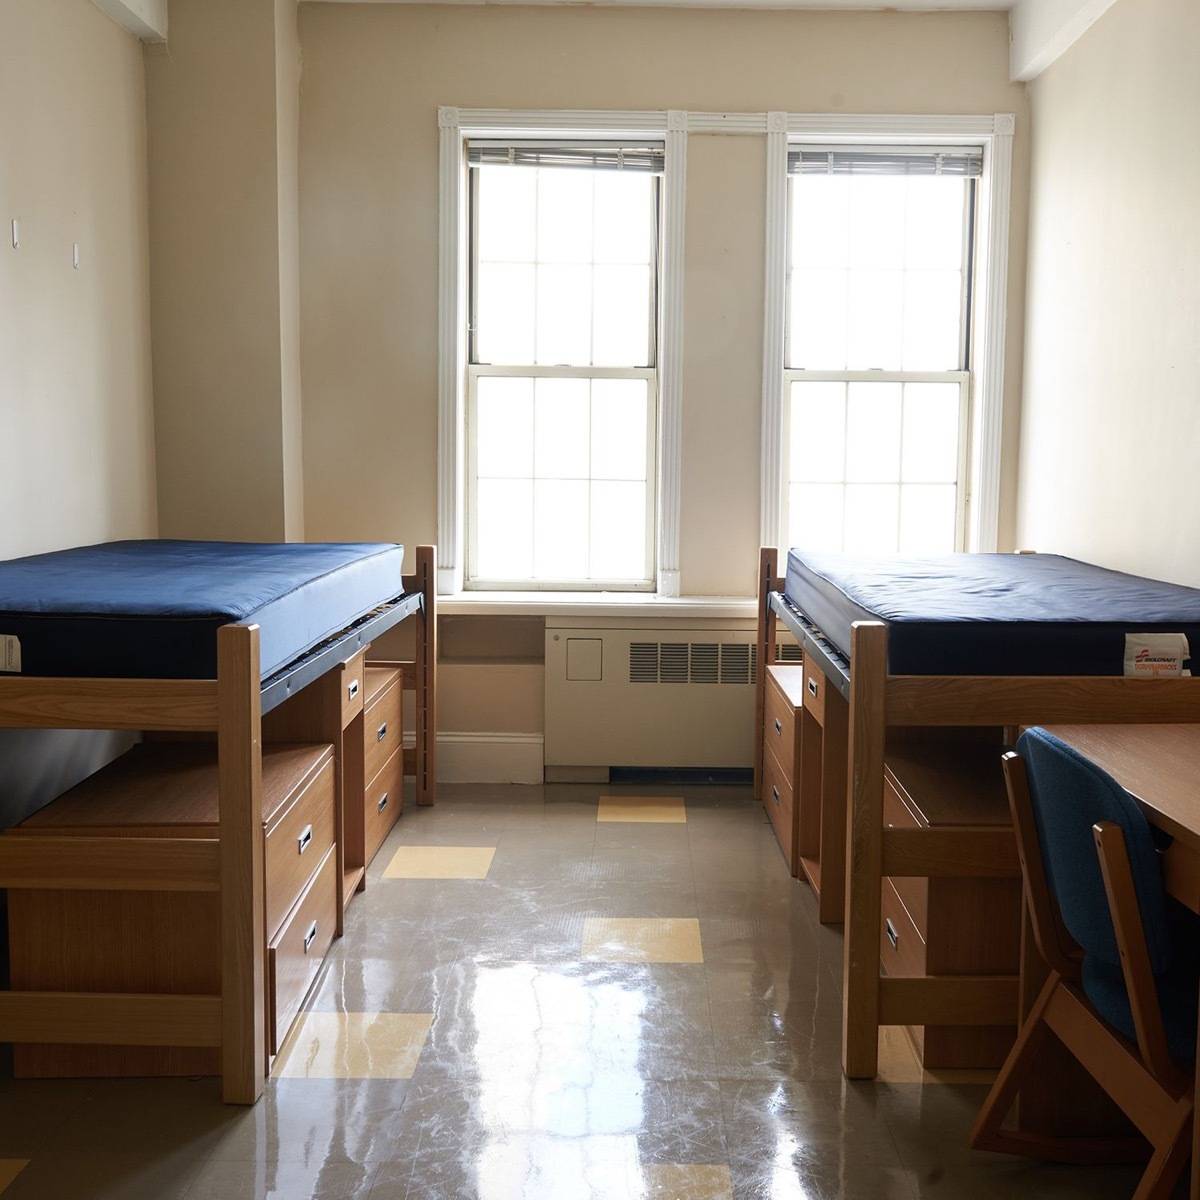 Beds sit across from each other in a semi-empty dorm room.